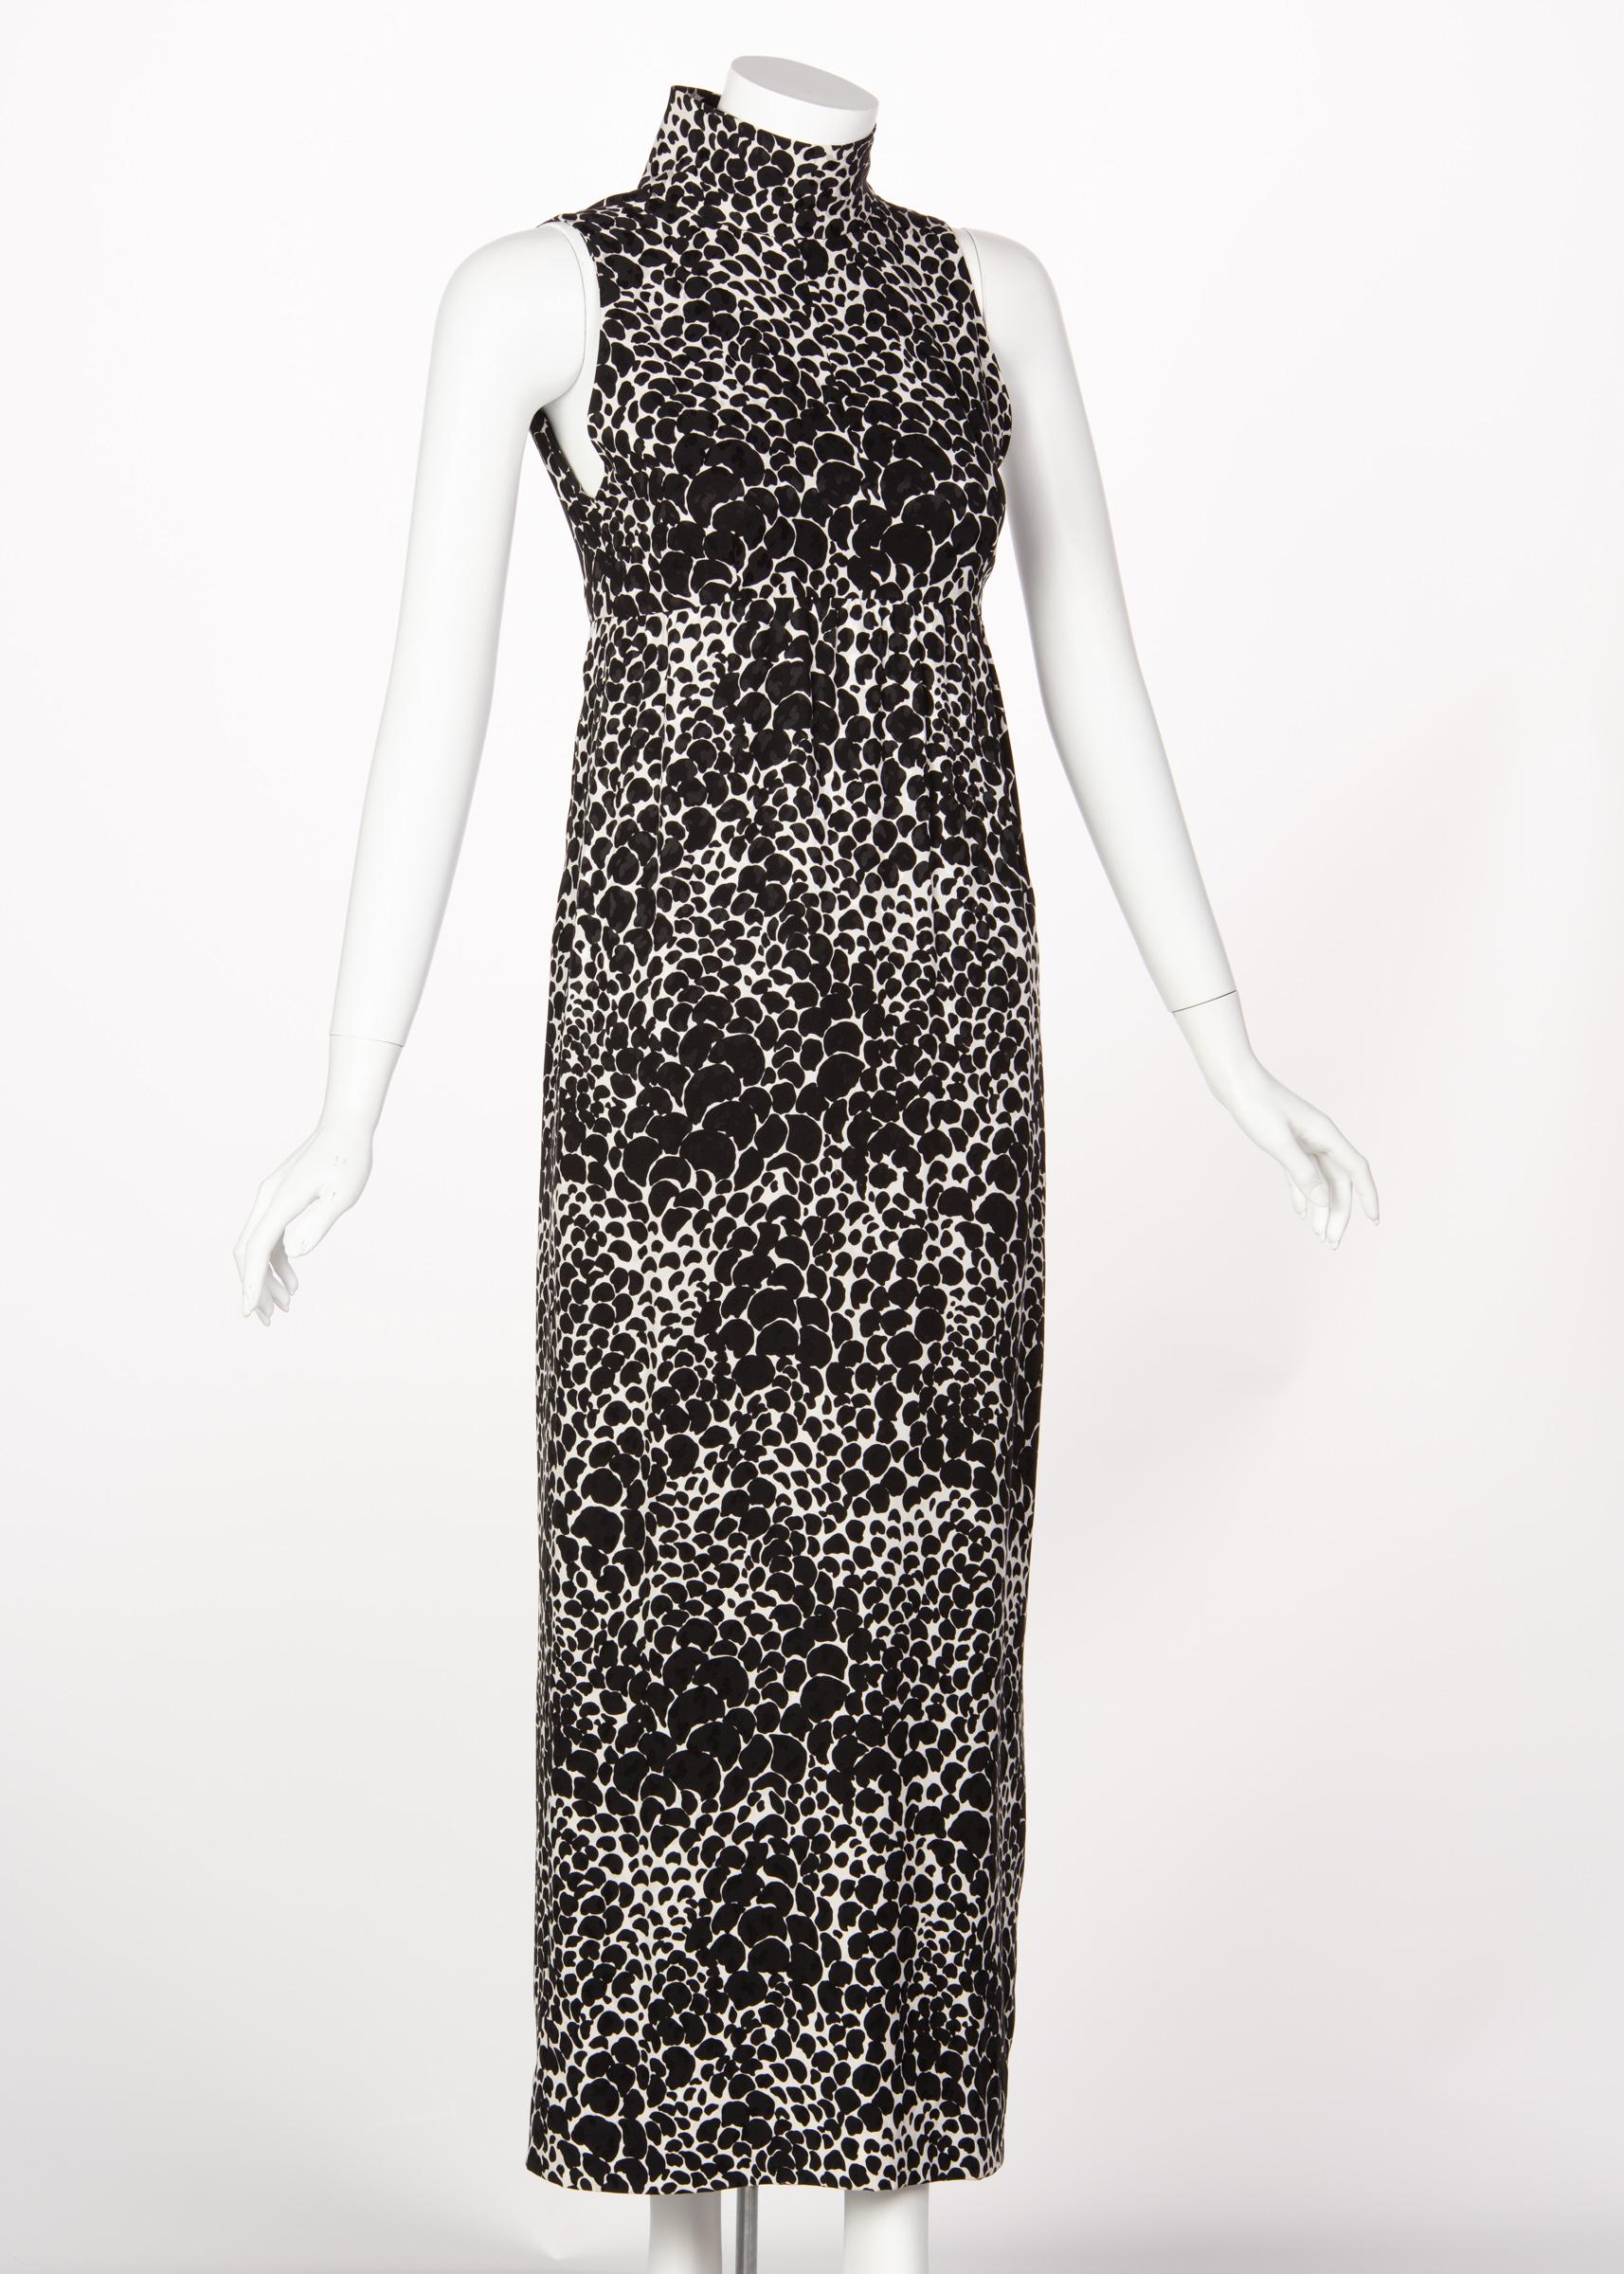 Yves Saint Laurent YSL Black and White Silk Print High Neck Evening Dress, 1985 In Excellent Condition In Boca Raton, FL